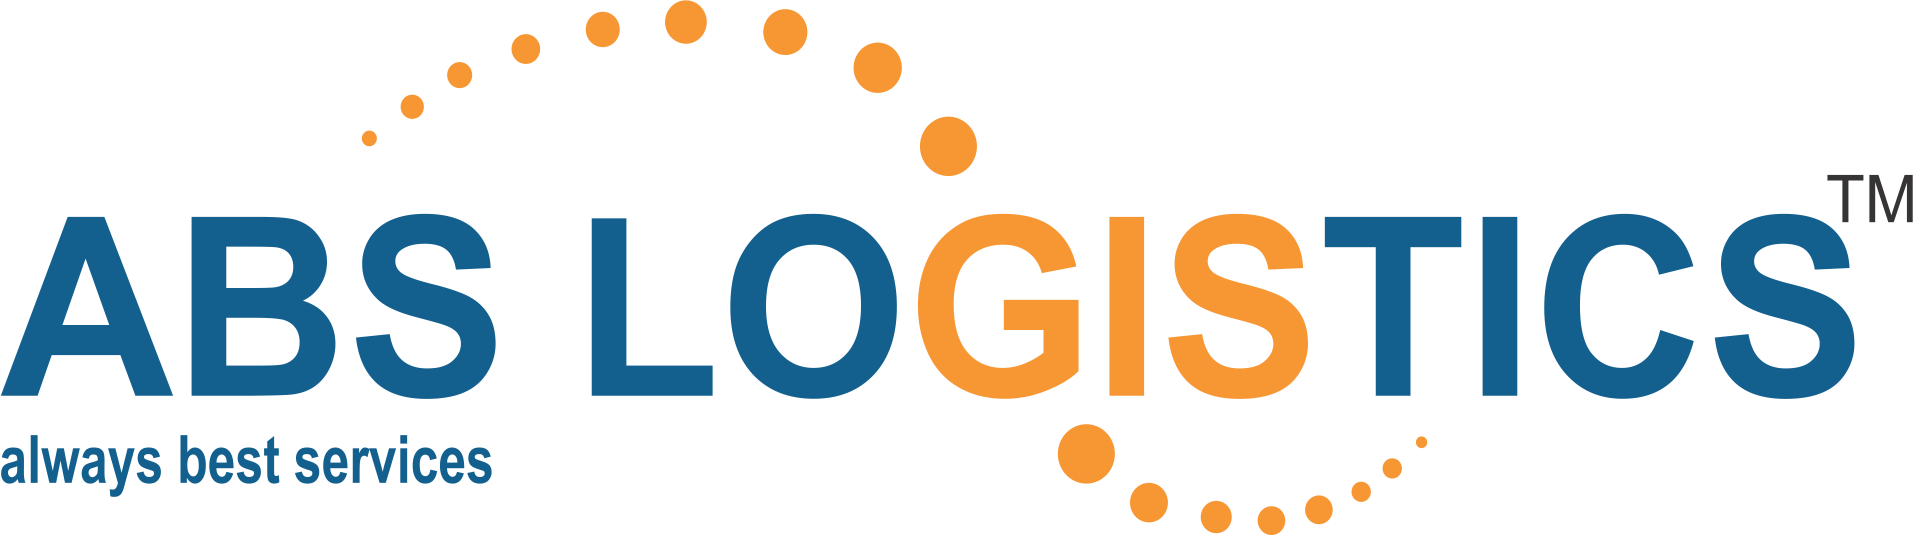 Best logistics services in India, Freight Logistics Services